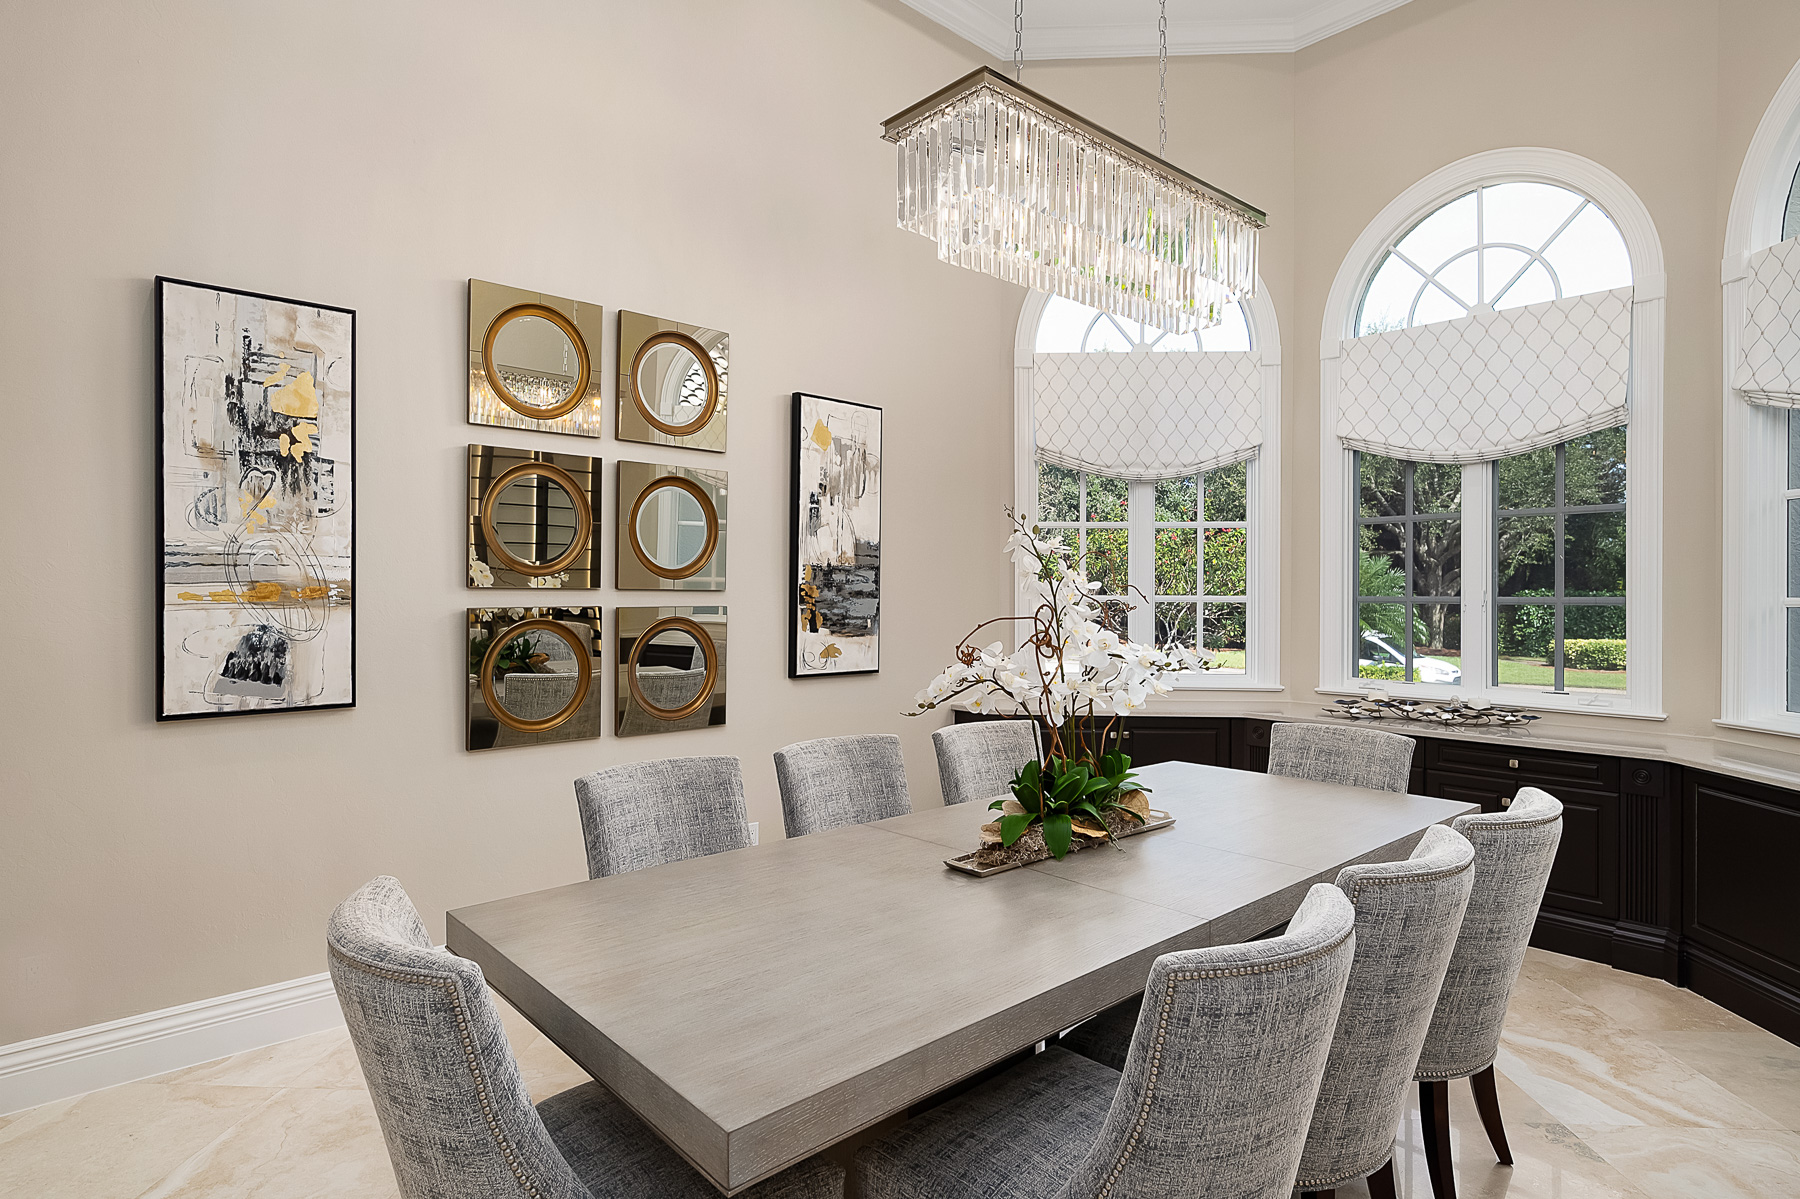 Formal dining room has a contemporary crystal chandelier and decorative gold mirrors overlook a long grey wash table with seating for eight in casually elegant chairs